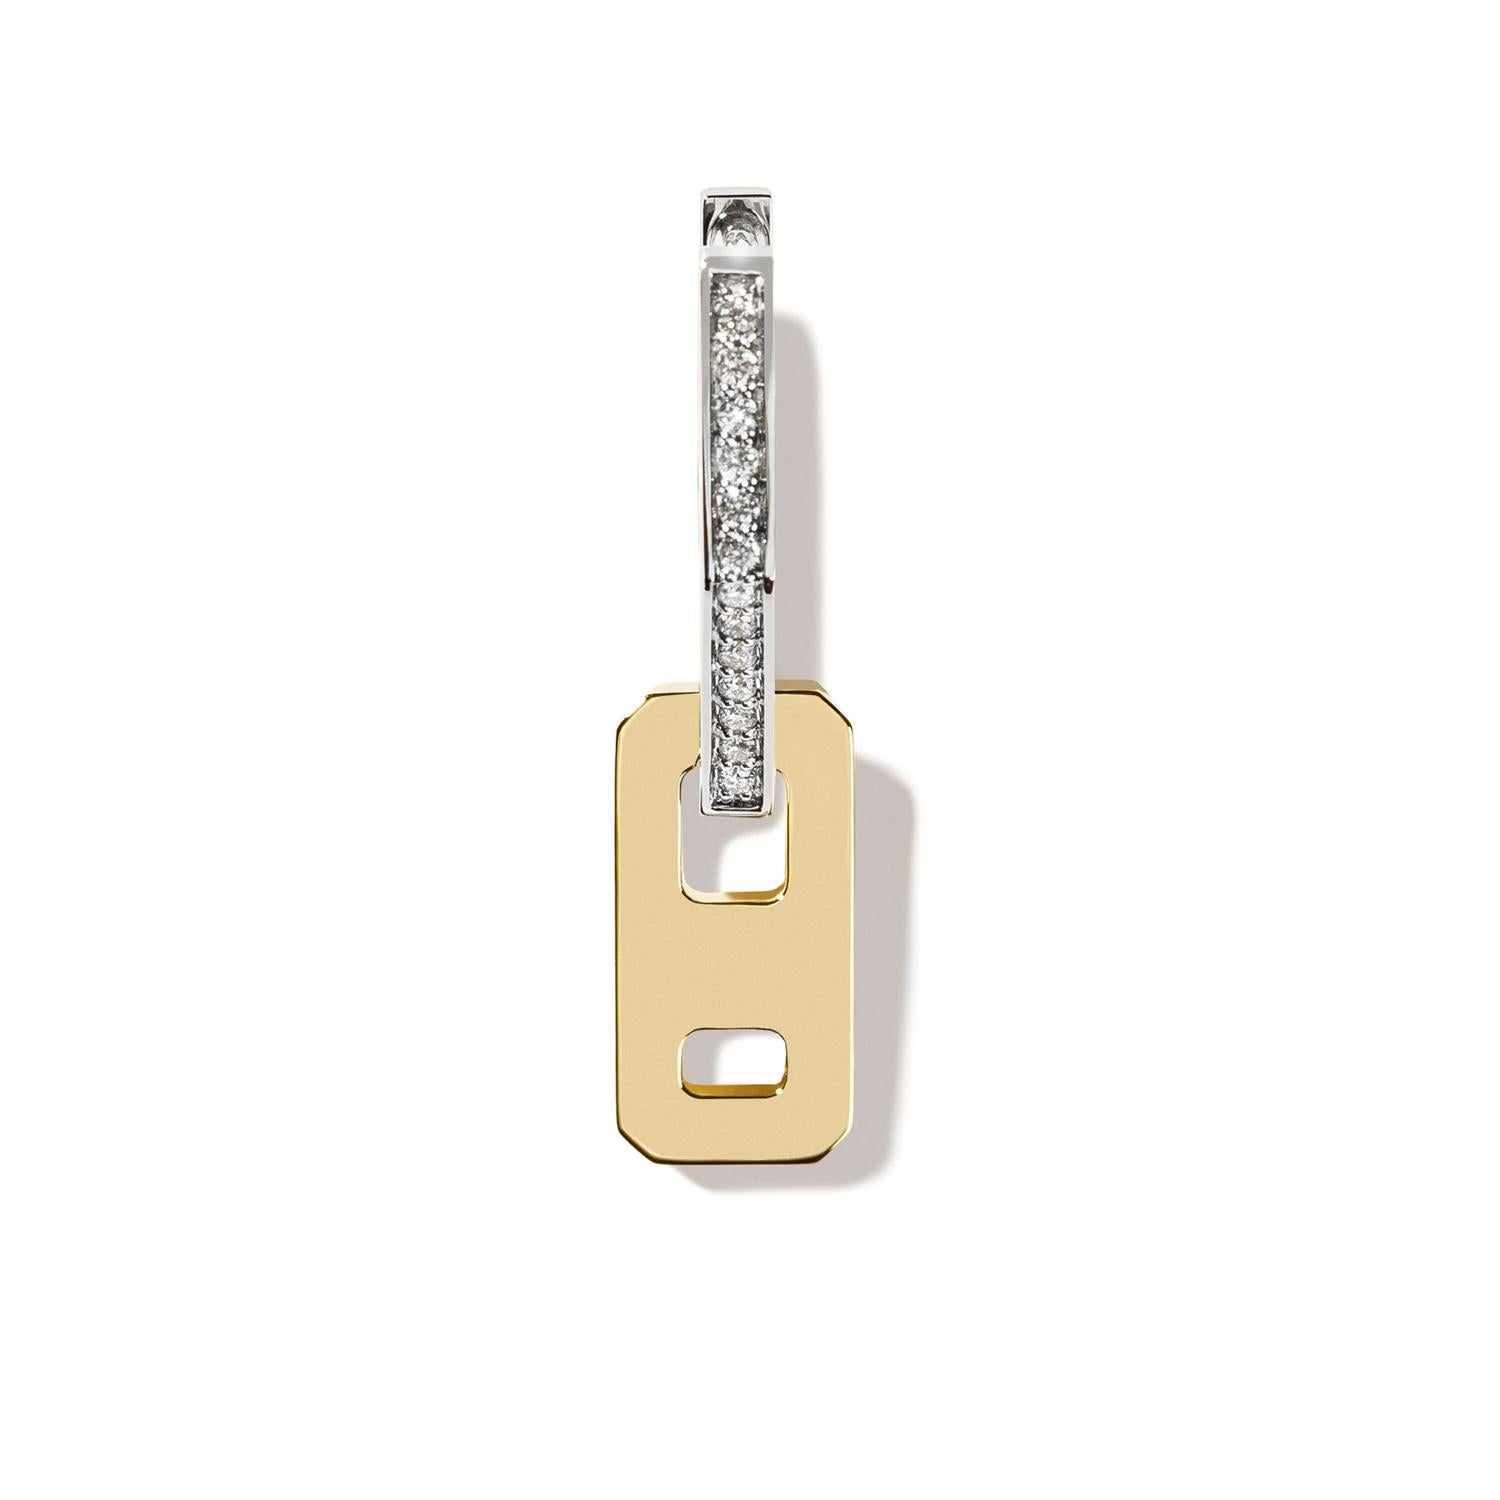 A simple yet chic earring with a difference from our latest collection.

Crafted in 18k gold, this chic earring is detailed with an angled pave diamond huggie hoop and finished with a solid gold drop design. Perfect to dress up your everyday wear,